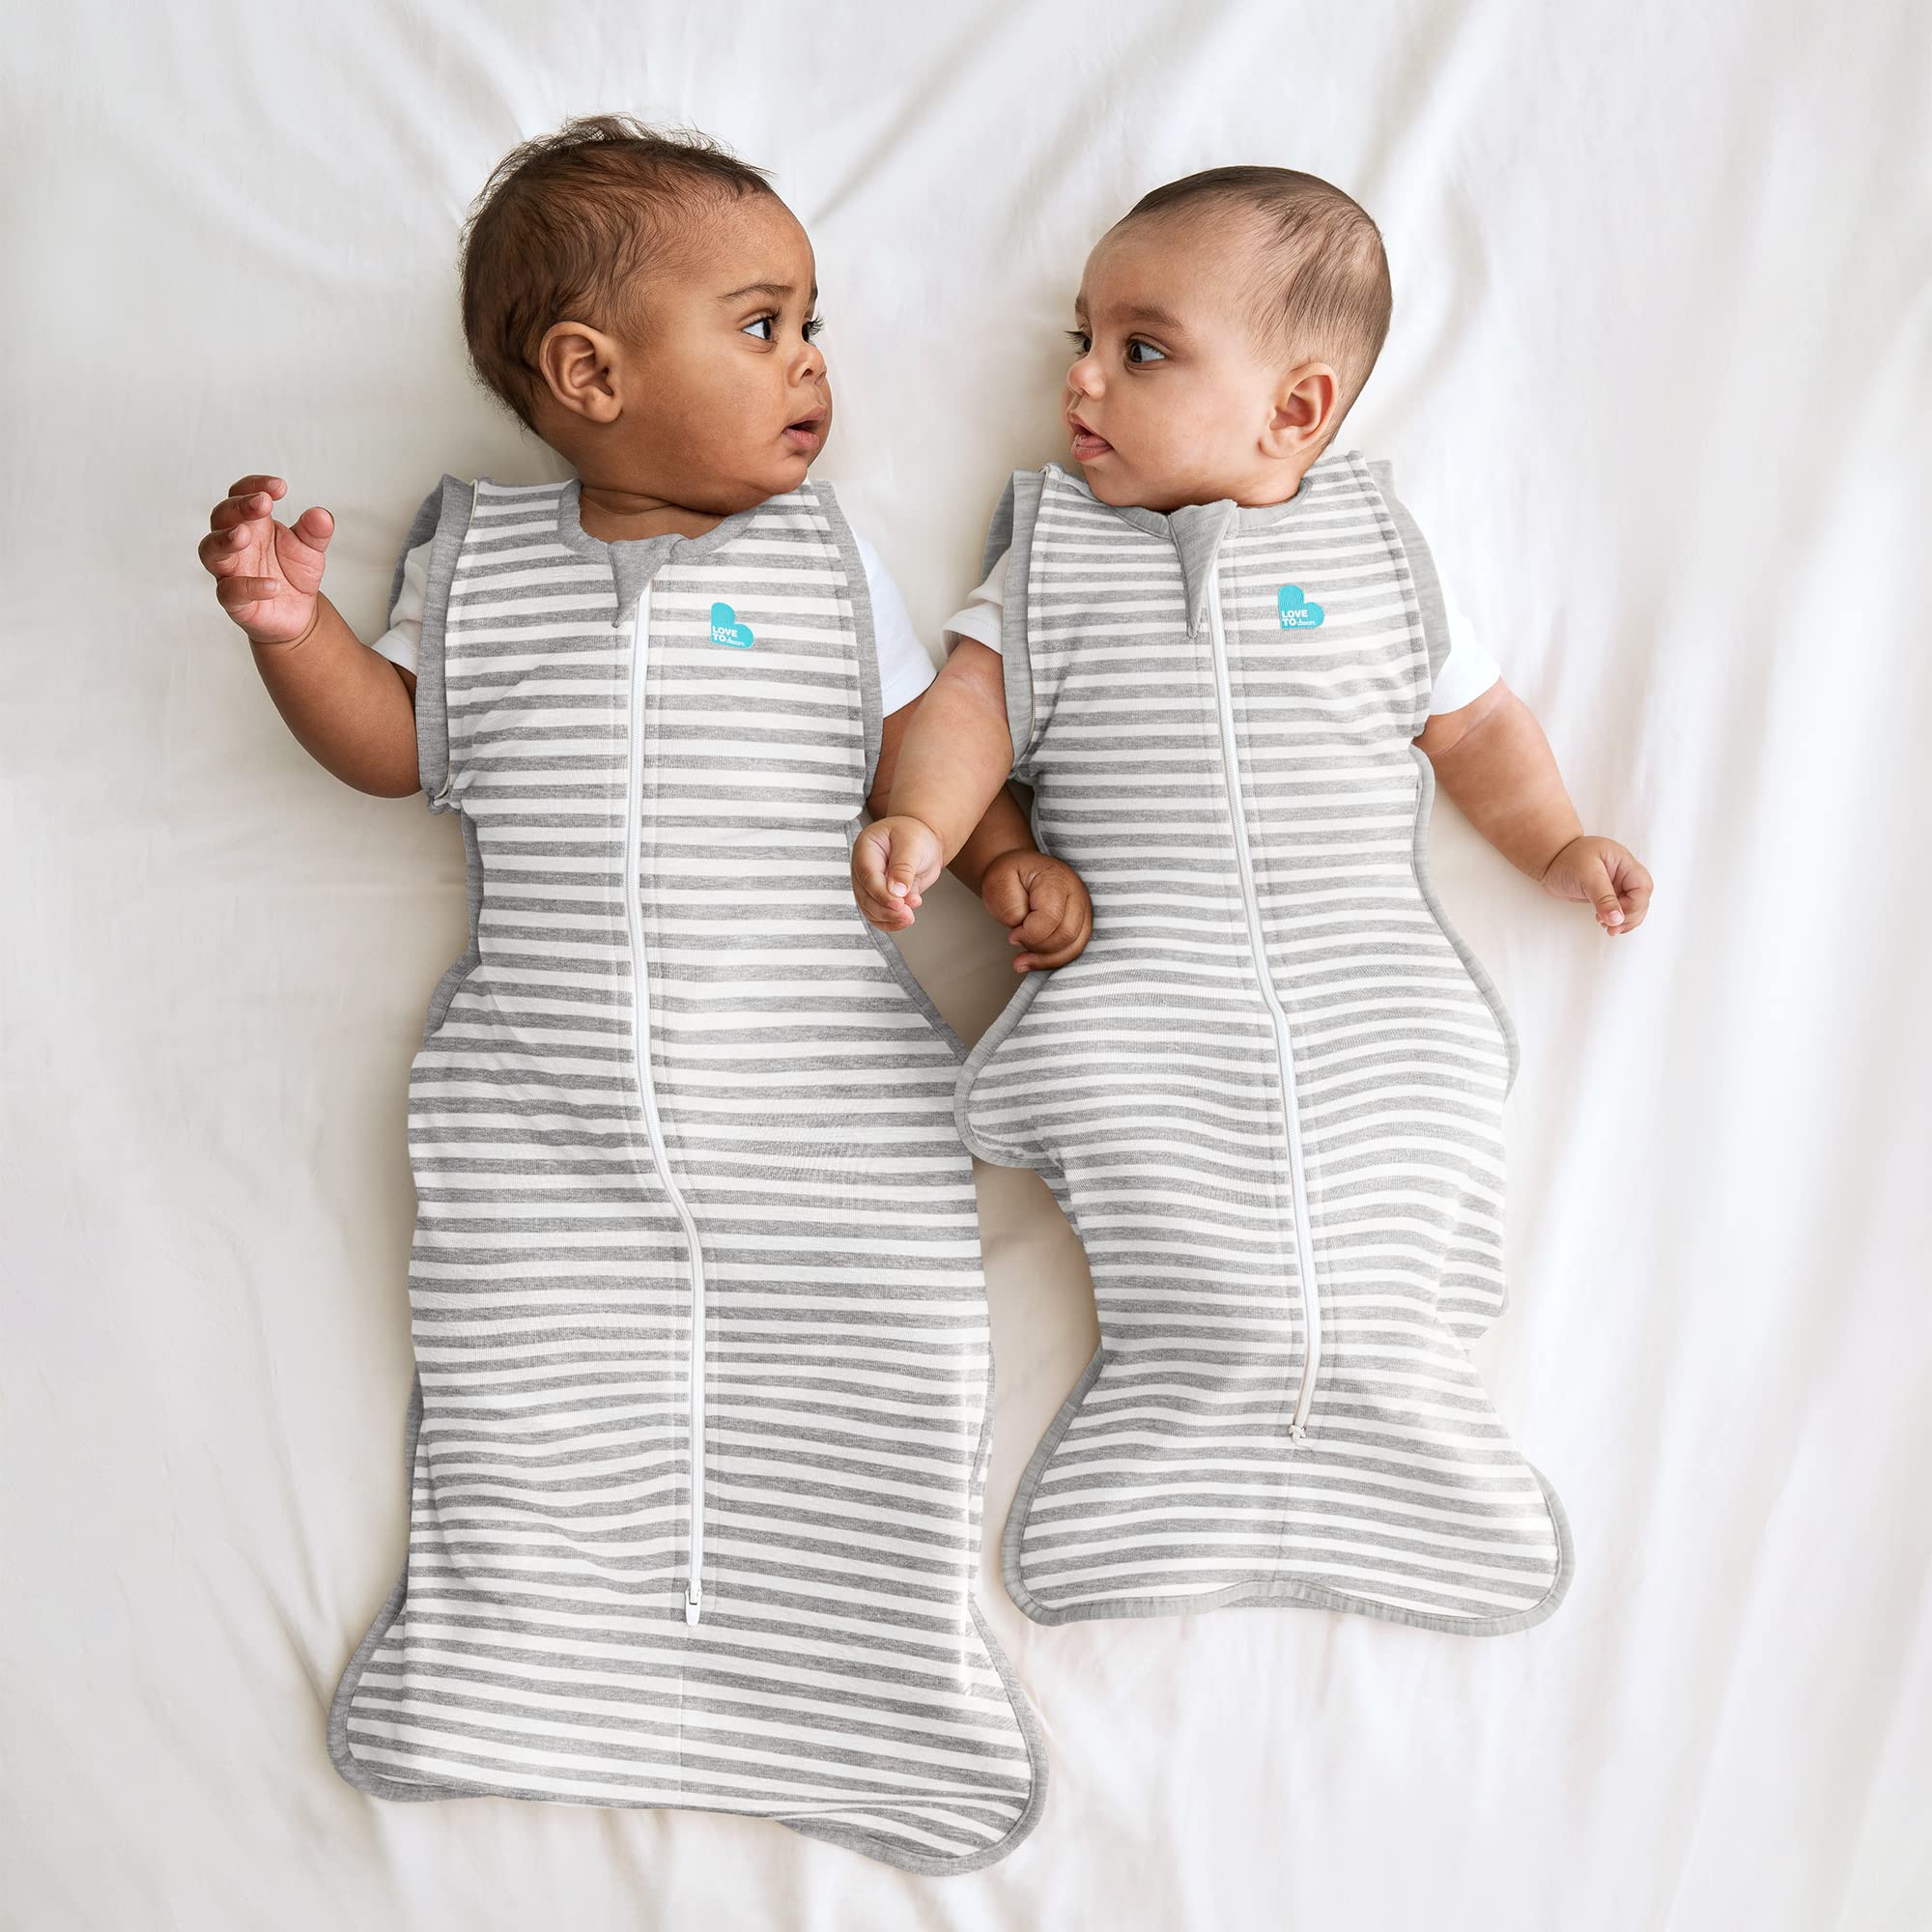 Love to Dream Swaddle UP Transition Bag Self-Soothing Sleep Sack 19-24 lbs, Patented Zip-Off Wings, Gently Help Baby Safely Transition from Swaddling to Arms Free Before Rolling, 1.0TOG Gray, Large